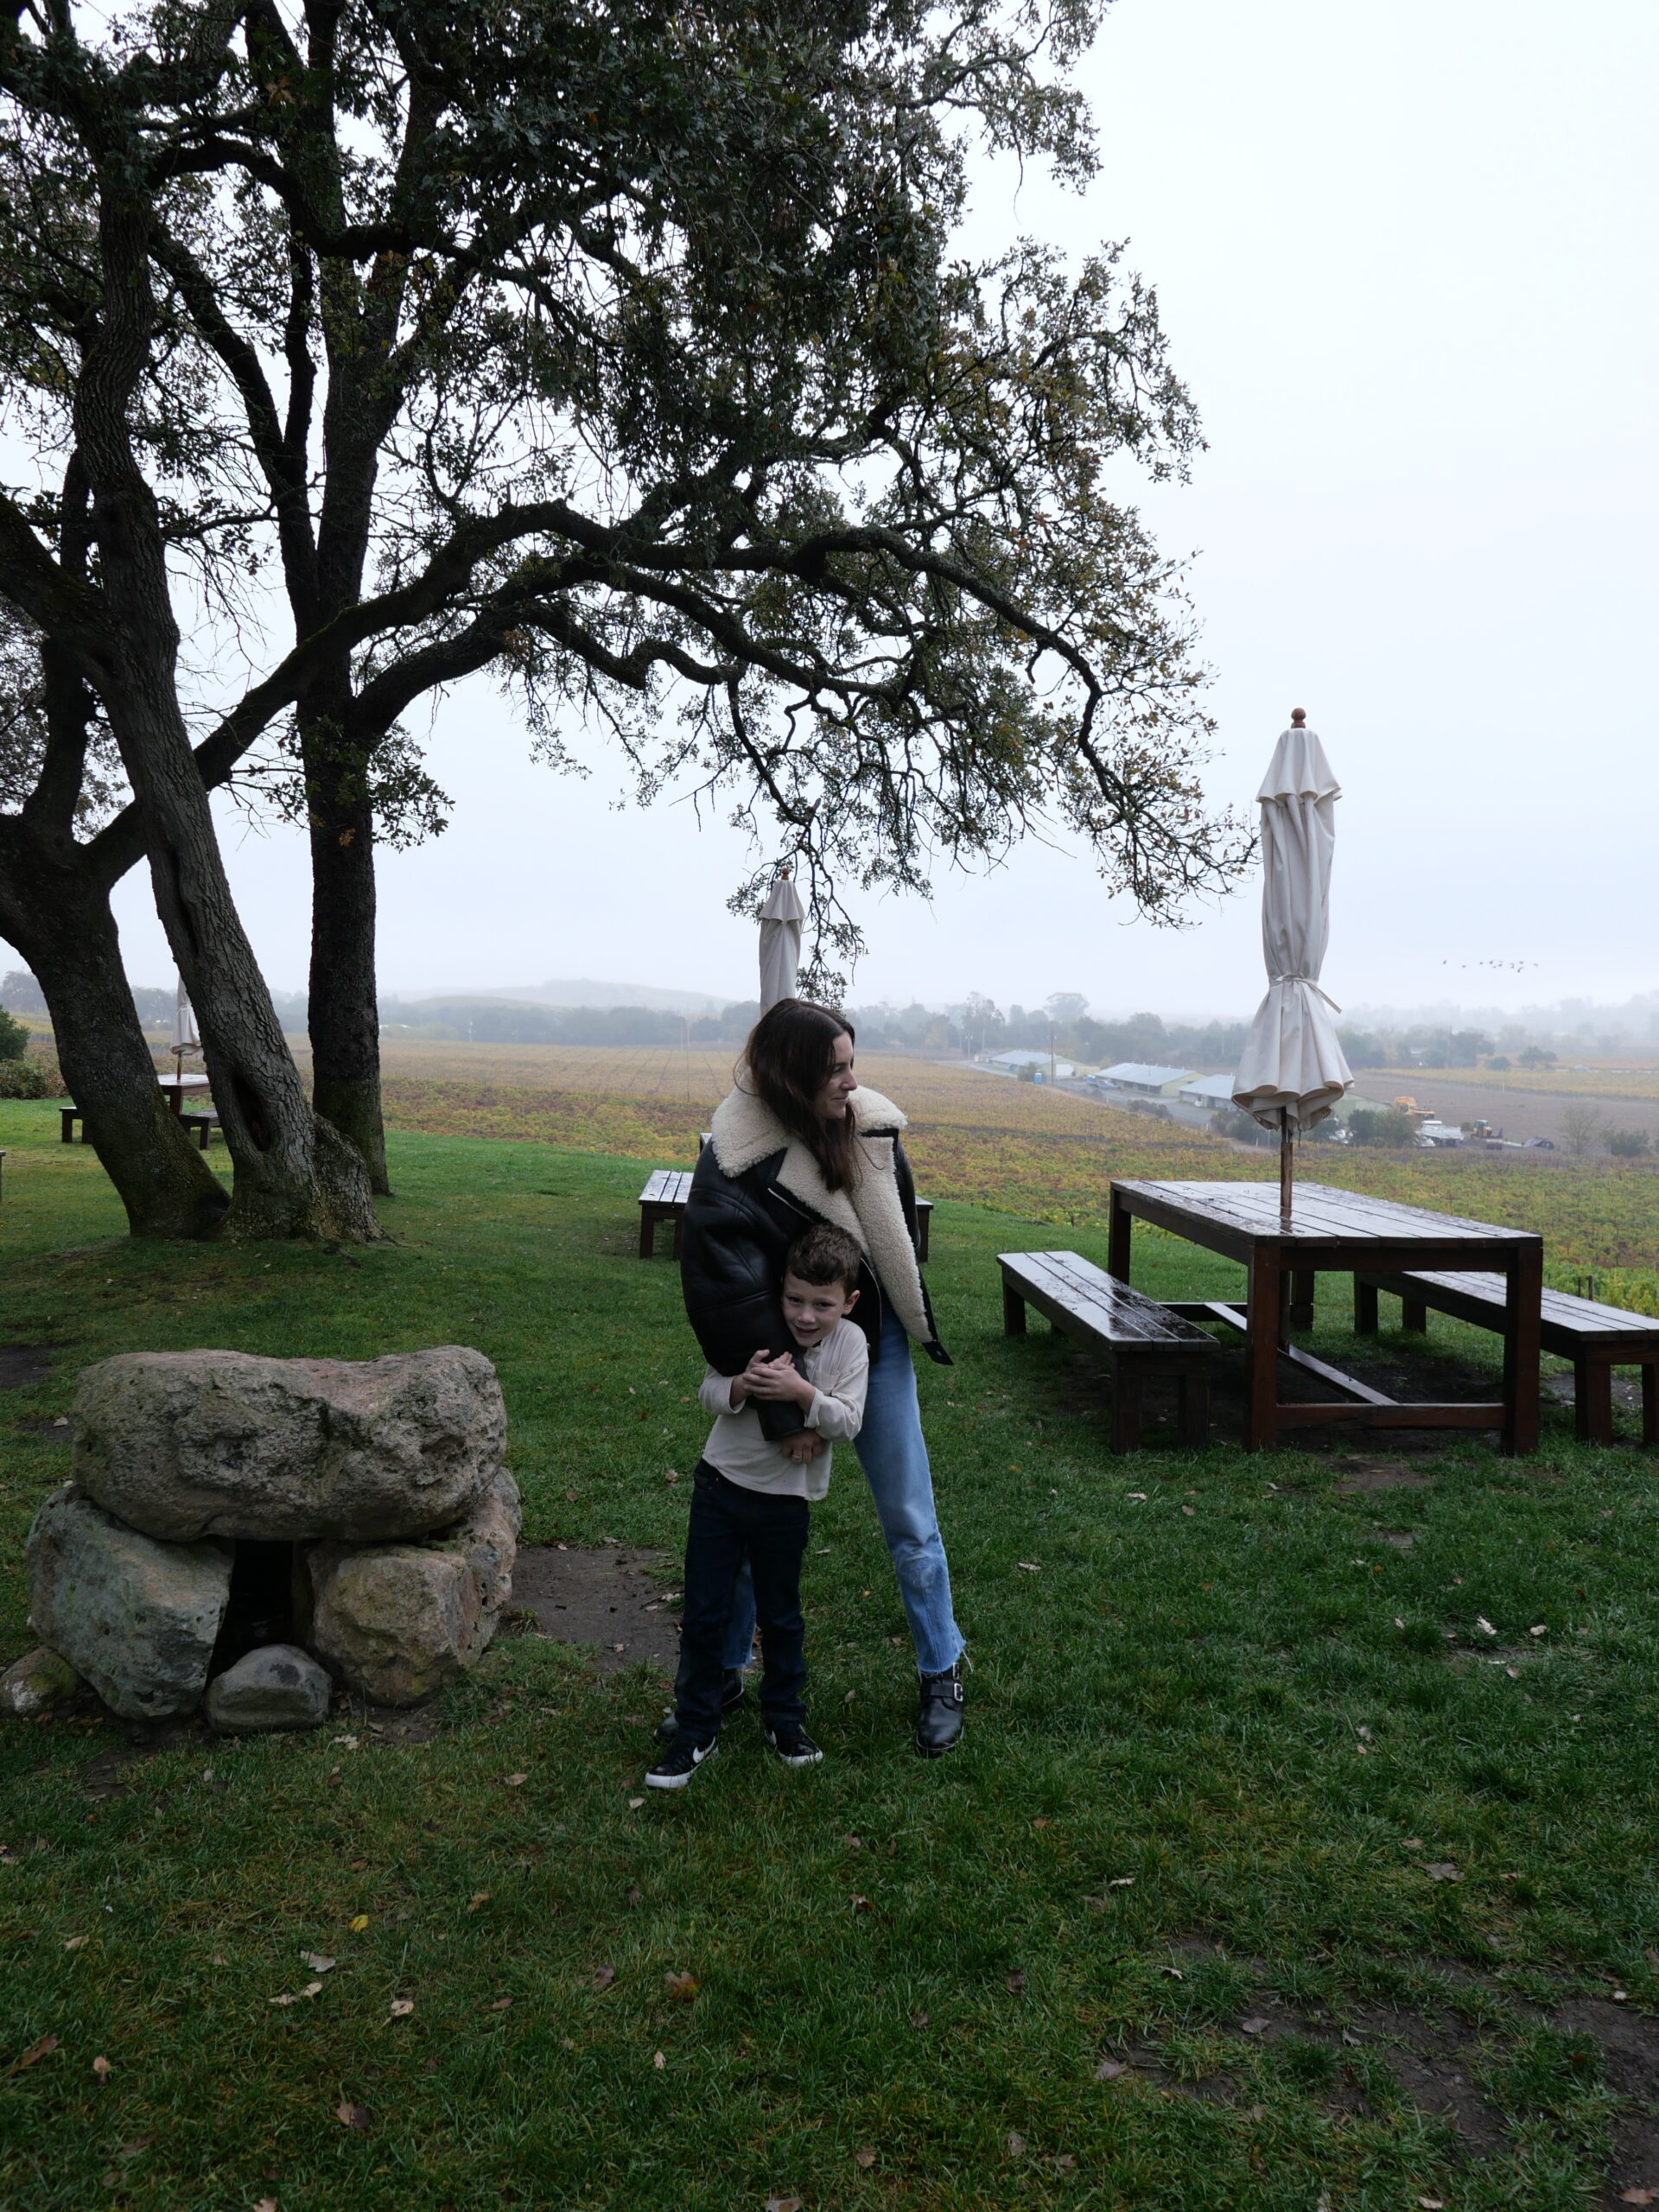 A drizzly afternoon at Scribe winery in Sonoma